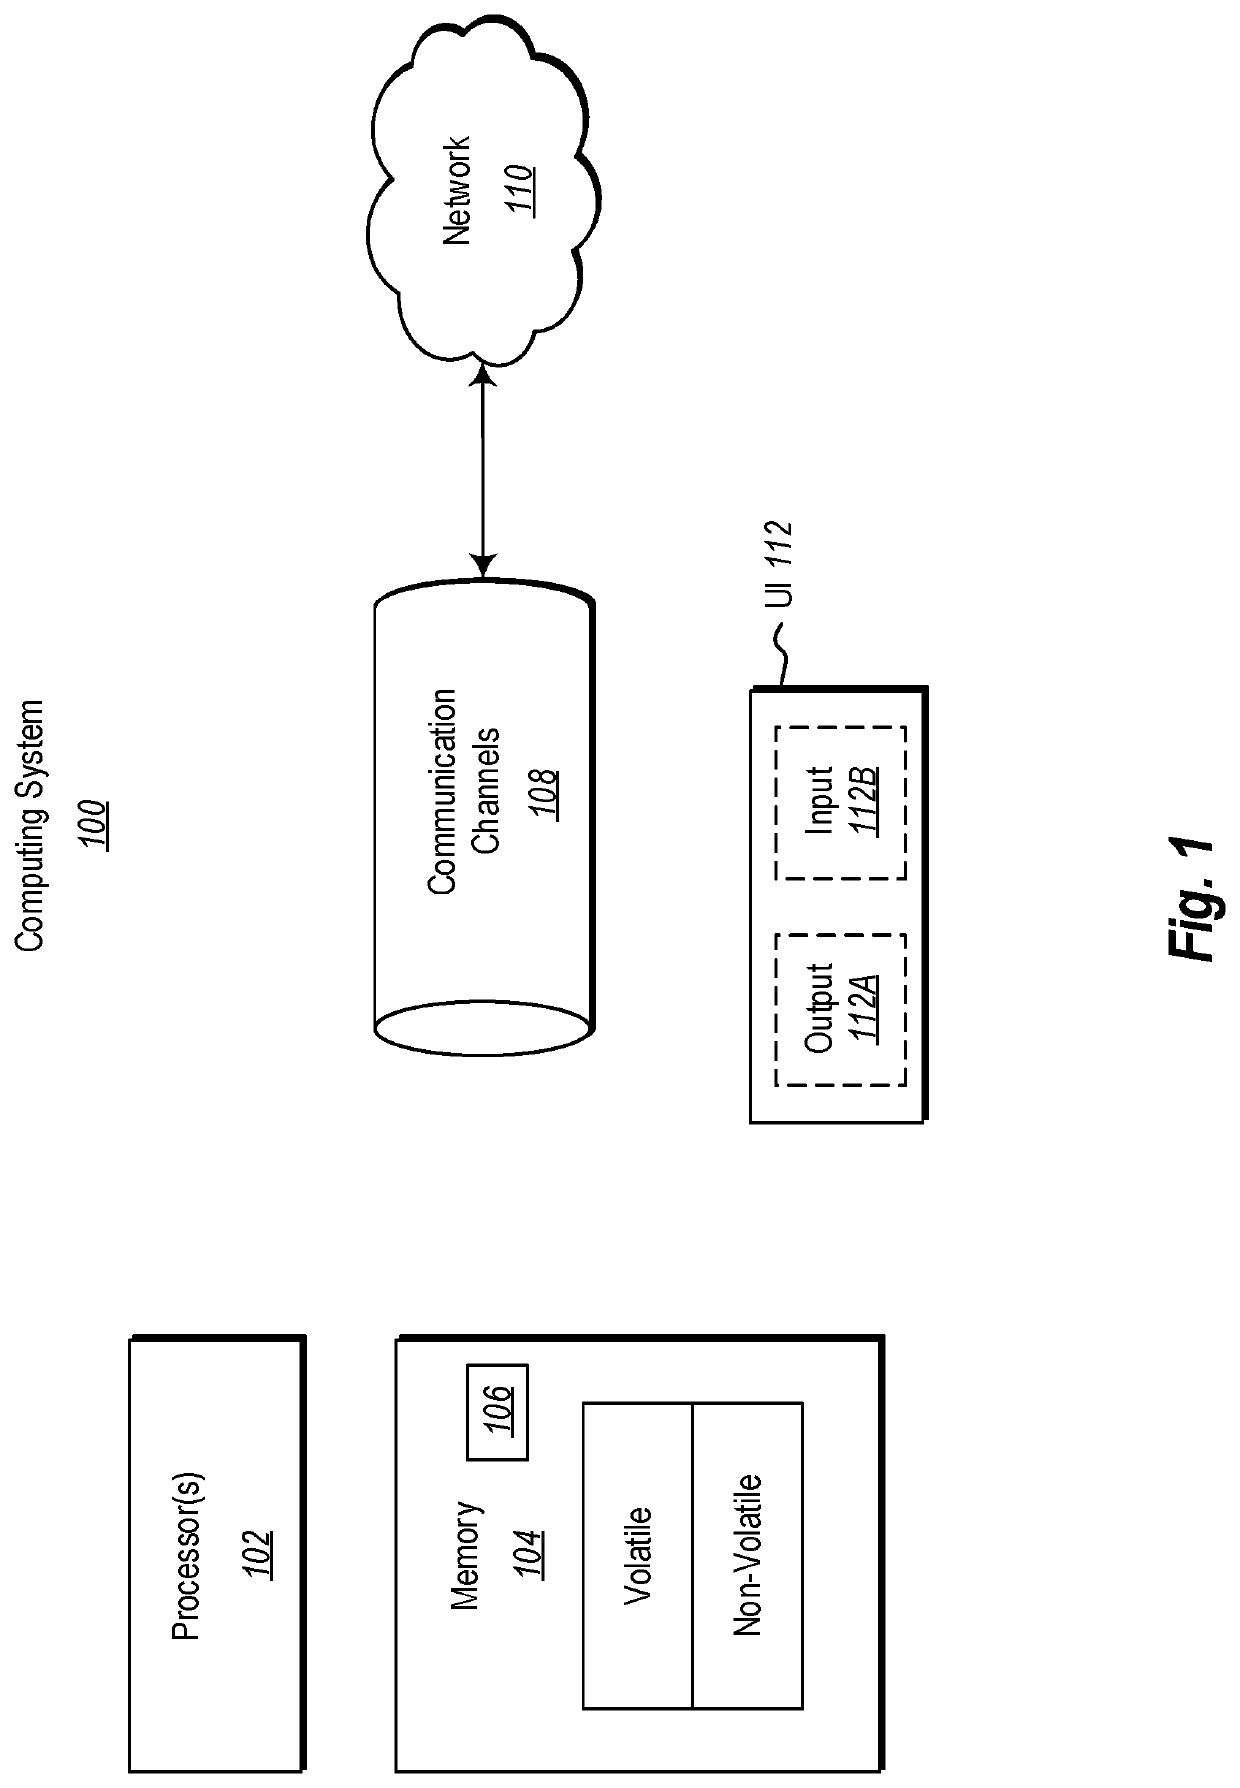 Methods and systems for executing business logic related to physical spaces and associated devices